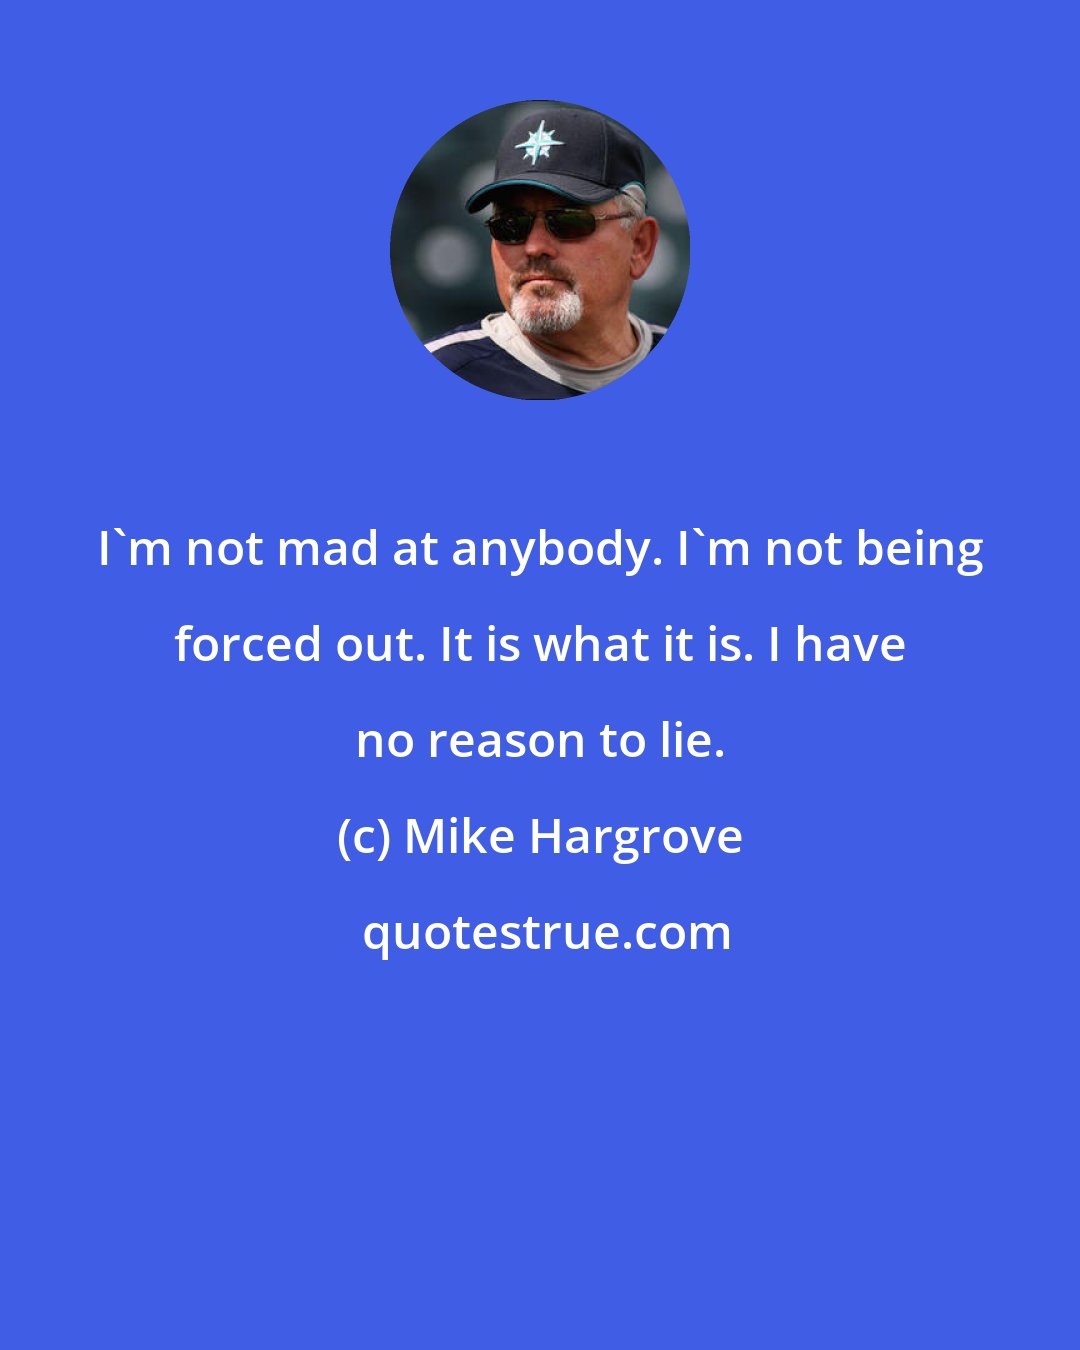 Mike Hargrove: I'm not mad at anybody. I'm not being forced out. It is what it is. I have no reason to lie.